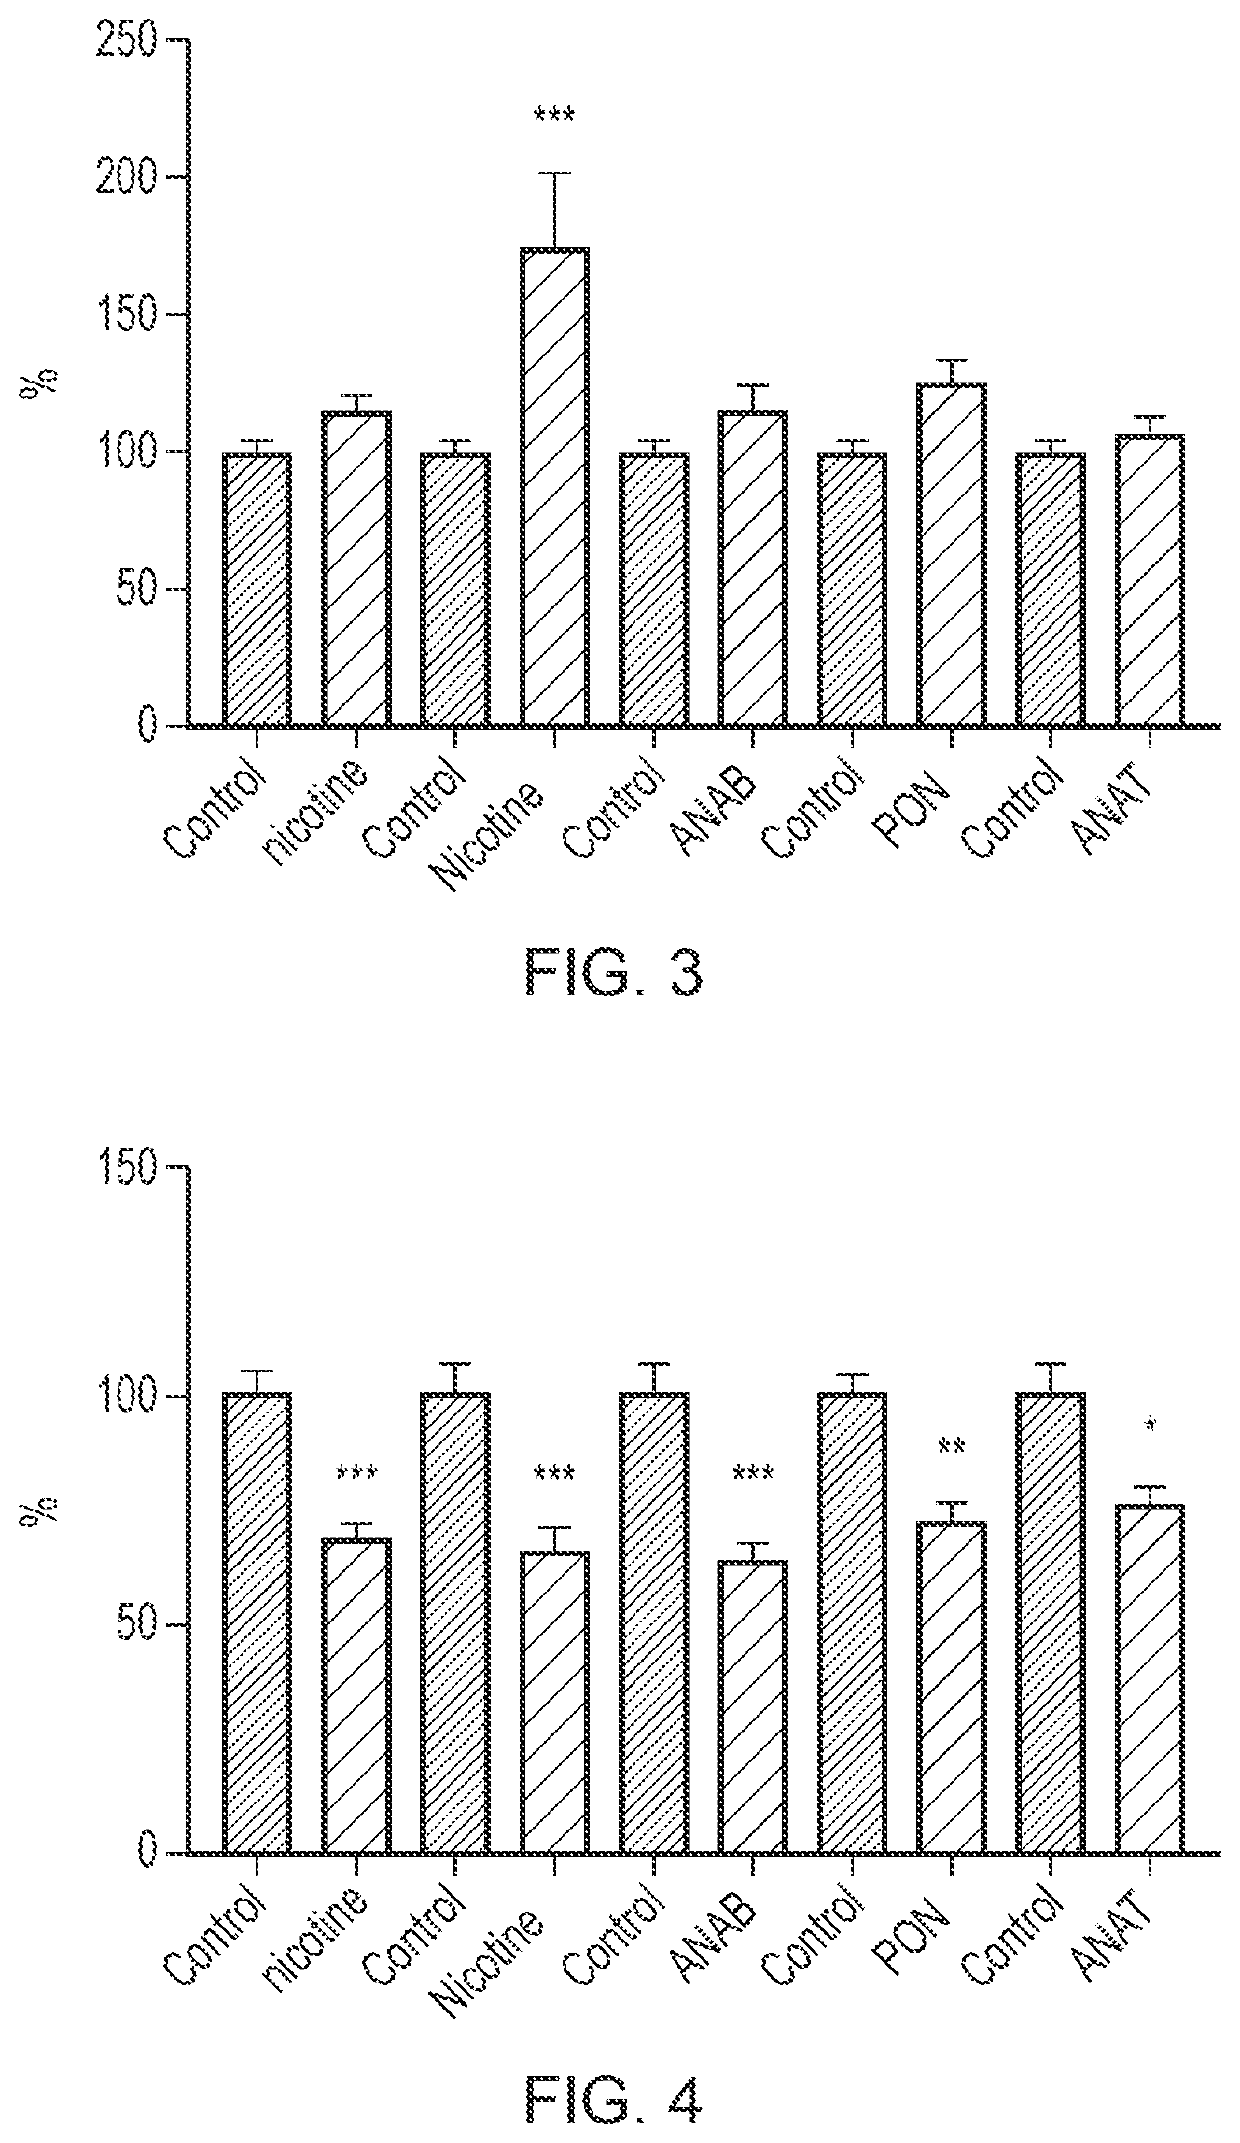 Method for decreasing the alkaloid content of a tobacco plant